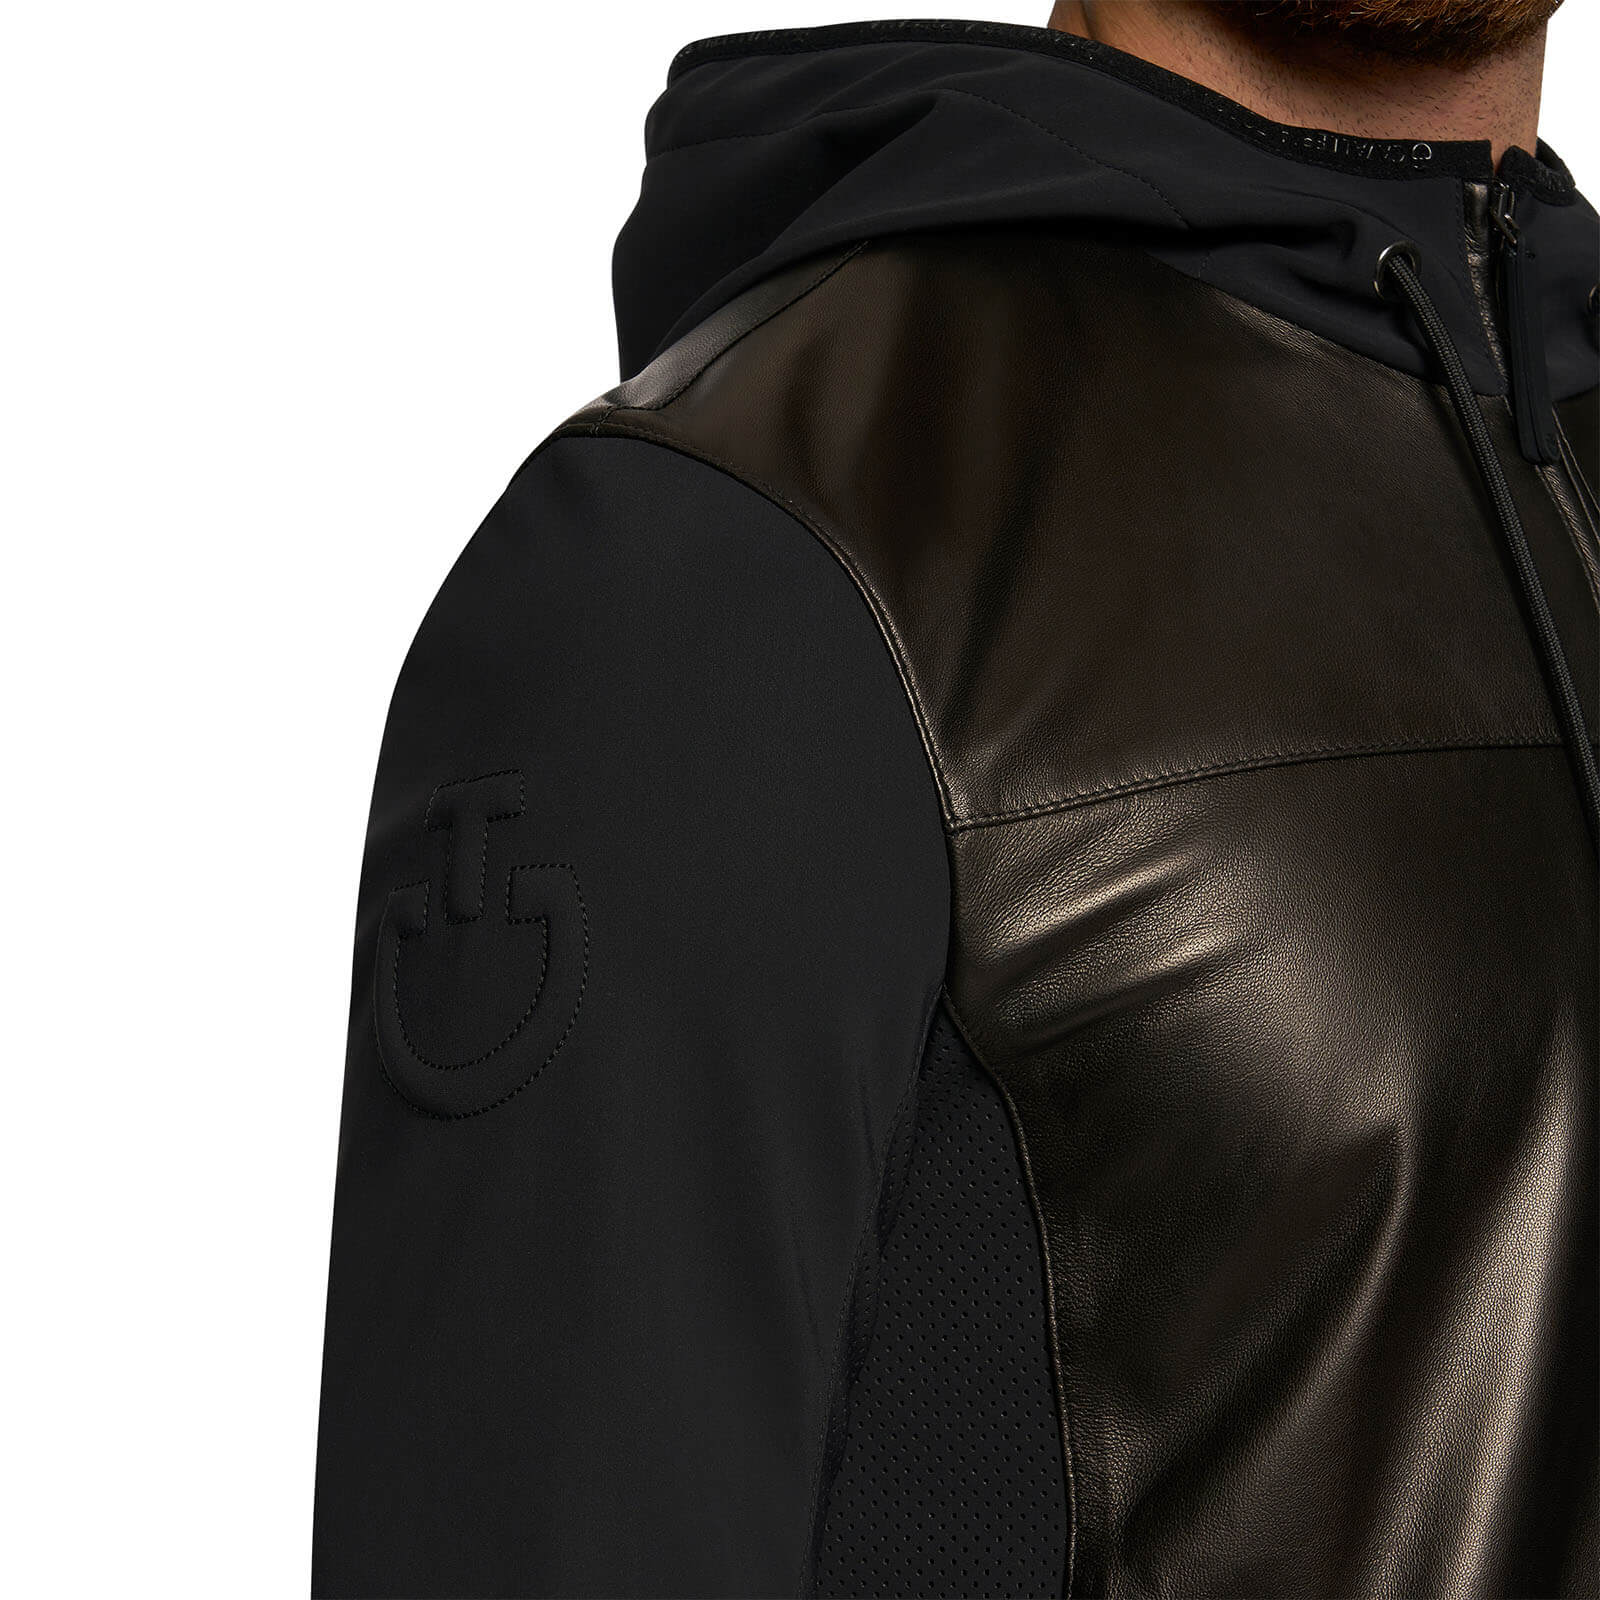 Men's leather jacket with style and function